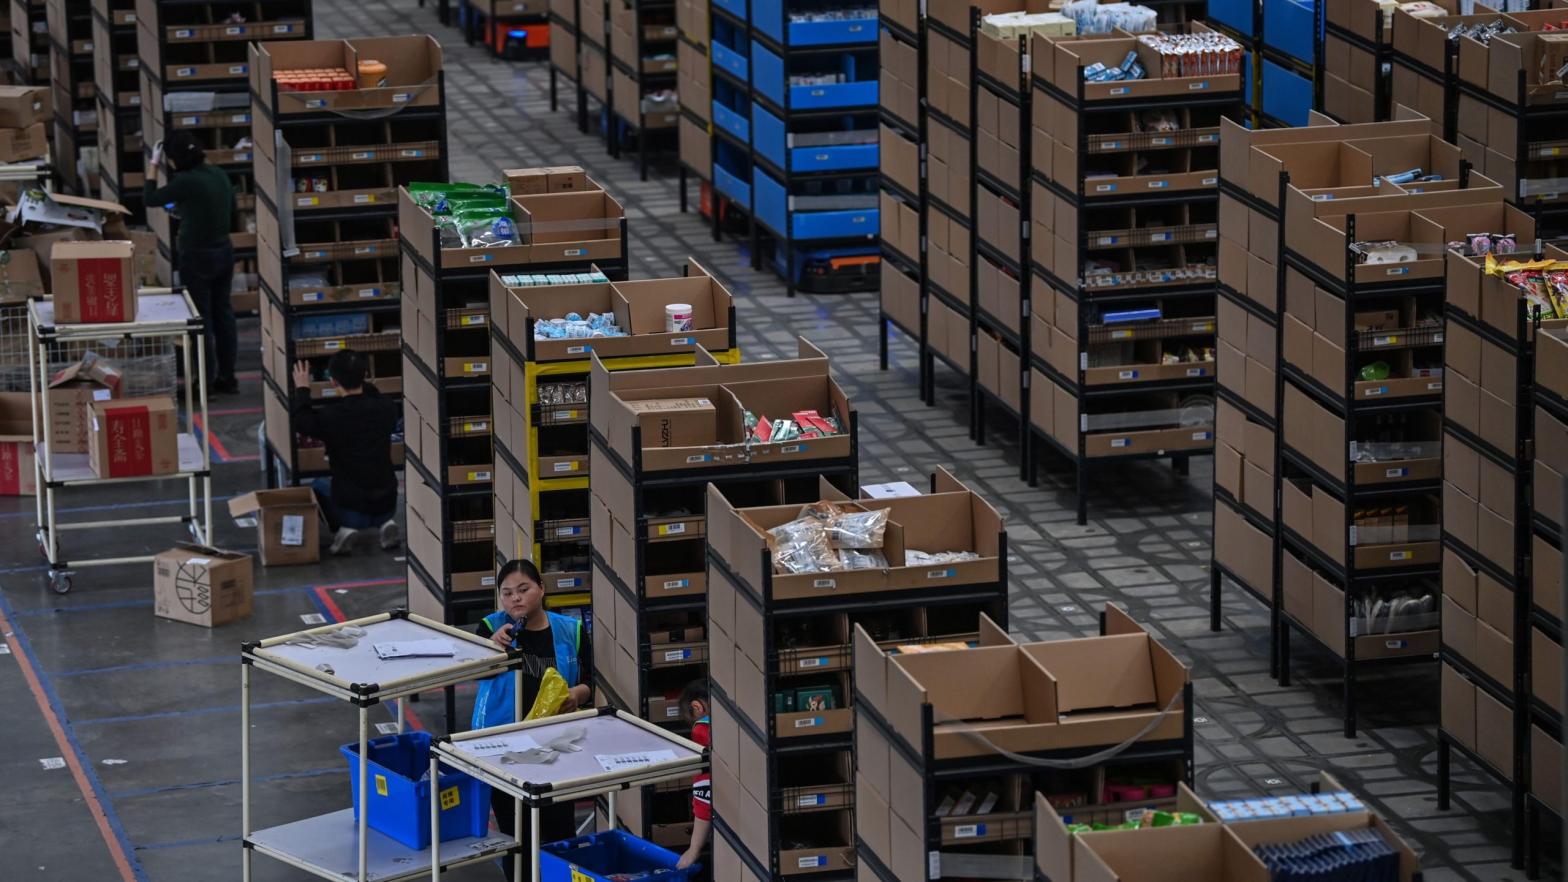 Employees put products in shelves which are then moved by robots in the warehouse of Cainiao Smart Logistics Network, the logistics affiliate of e-commerce giant Alibaba, in Wuxi, China's eastern Jiangsu province. (Photo: Hector Retamal/AFP, Getty Images)